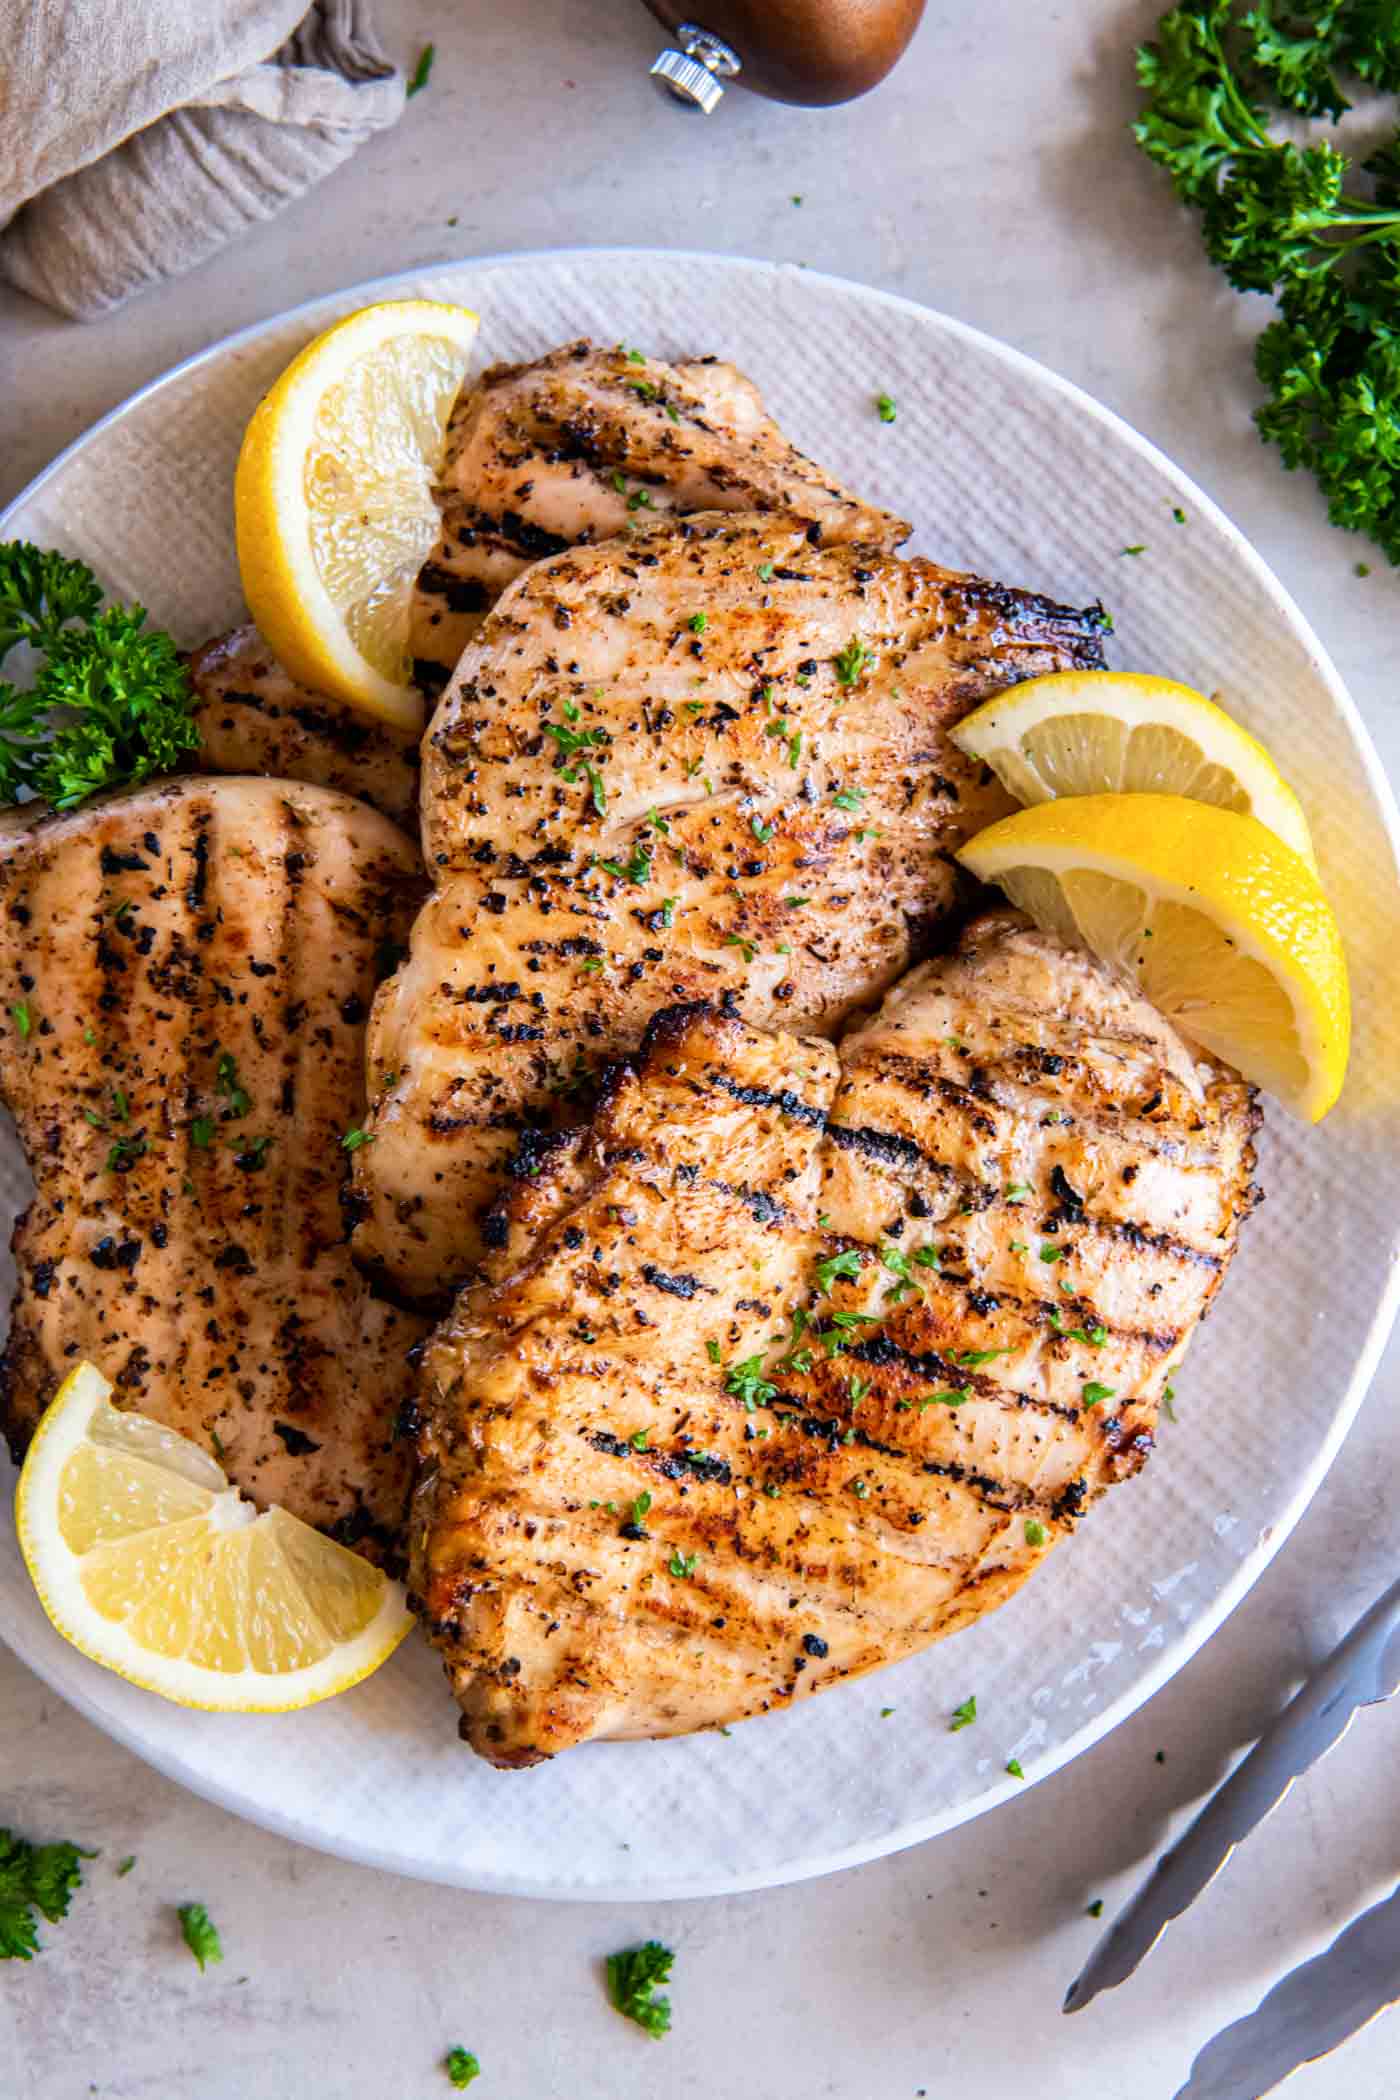 Four grilled chicken breasts on a plate, garnished with lemon wedges and fresh parsley.